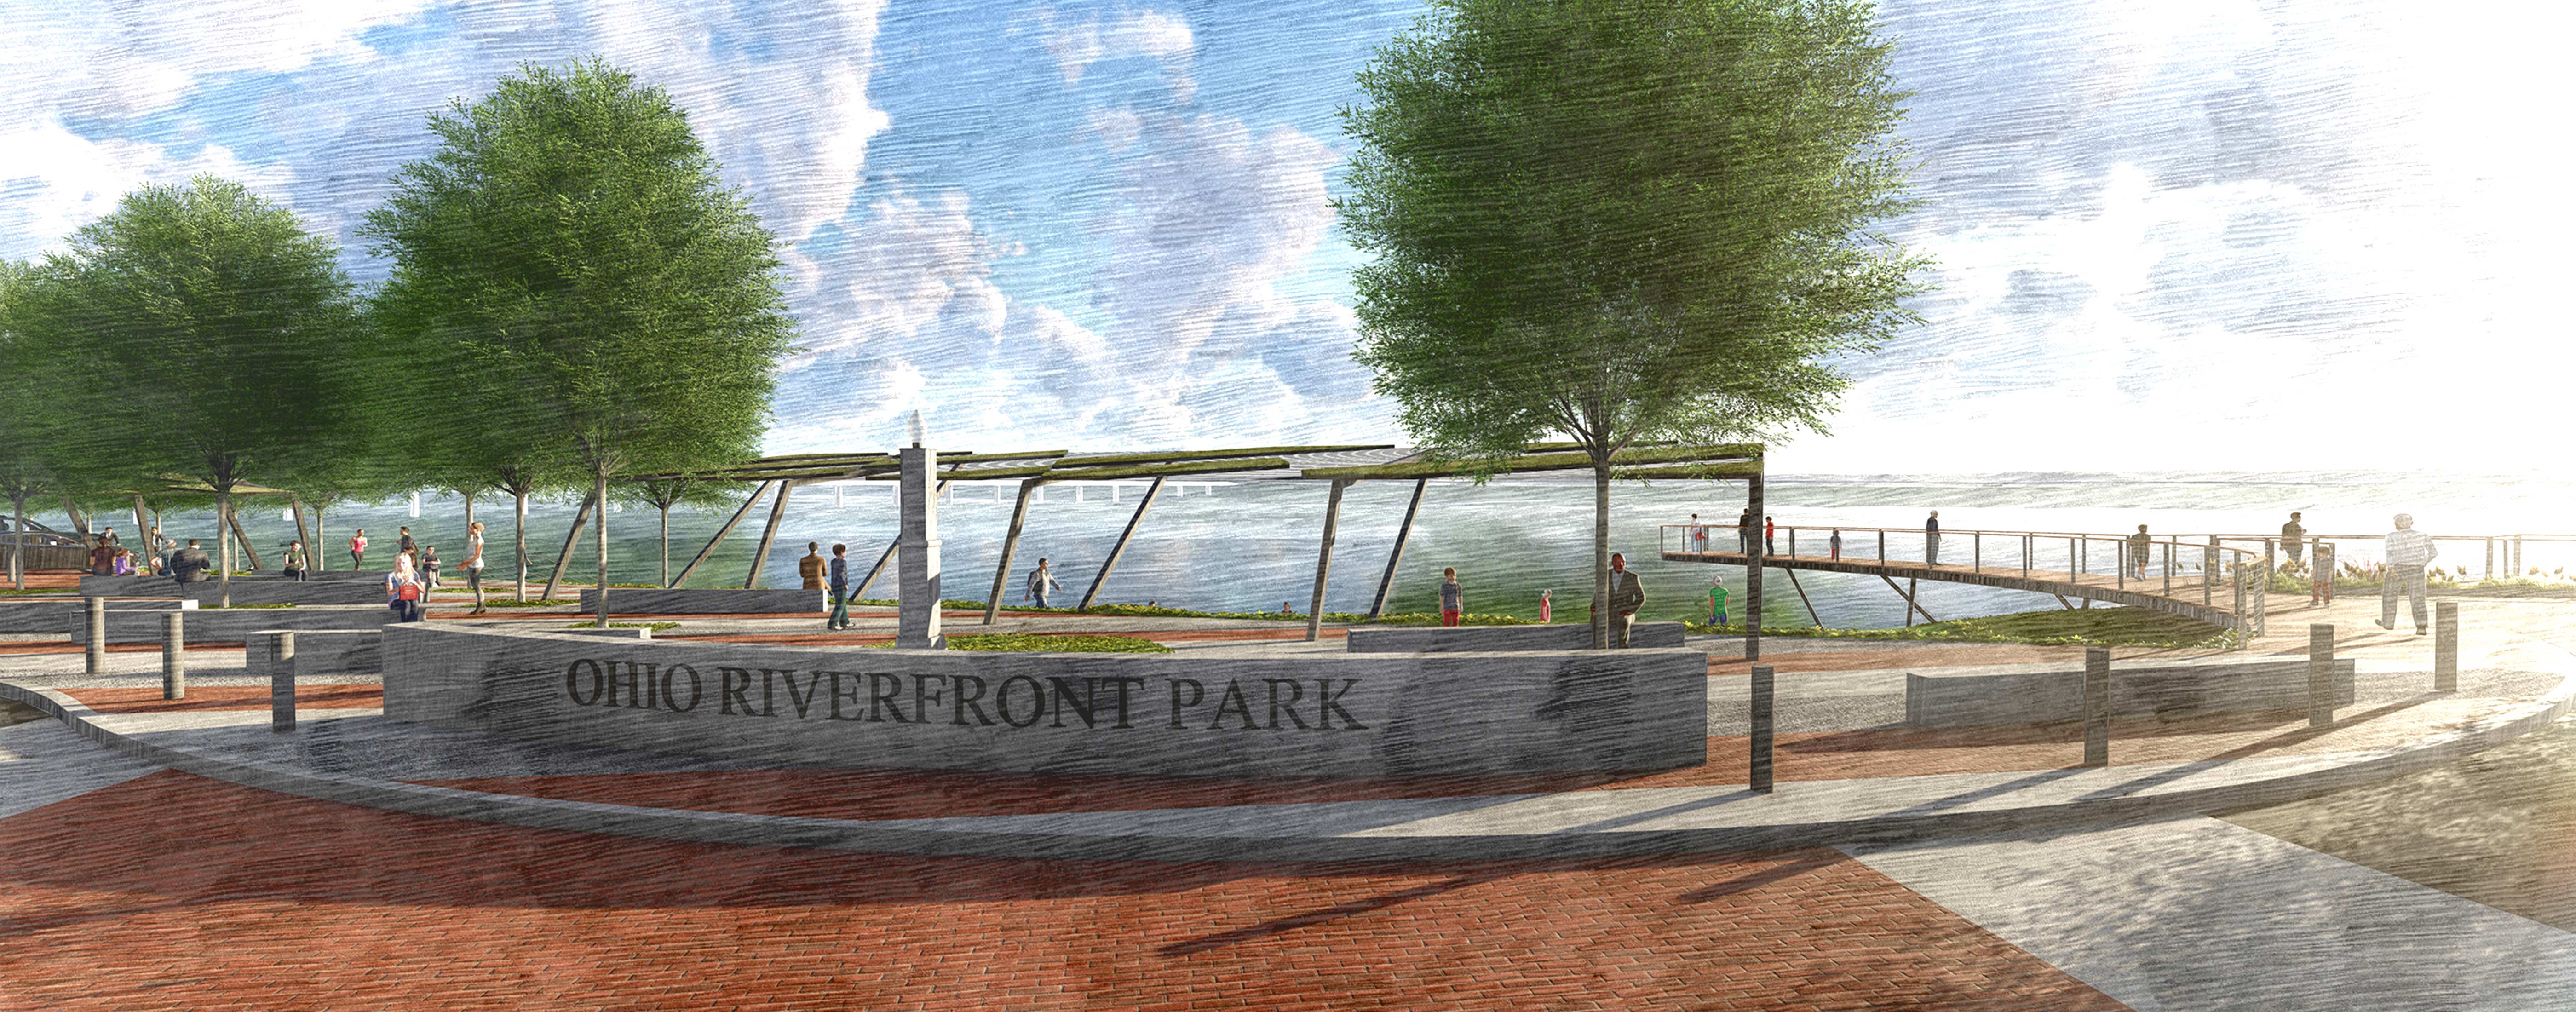 A sketch of the Ohio Riverfront Park in Downtown Marietta, as part of the historic vision and plan.